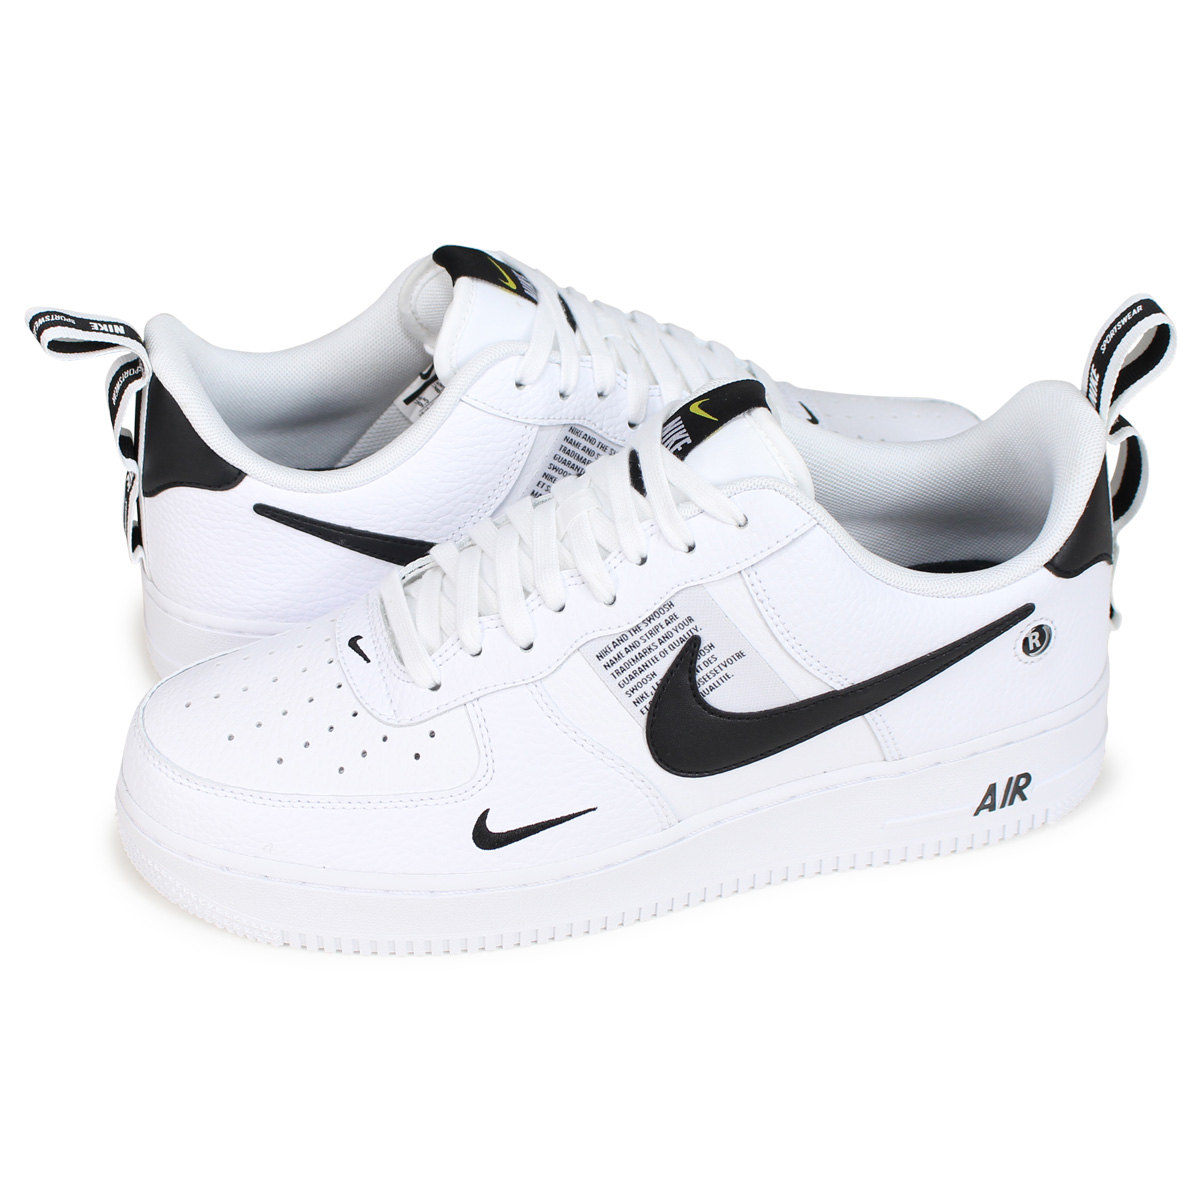 air force 1 utility men Online Shopping mall | Find the best prices and ...